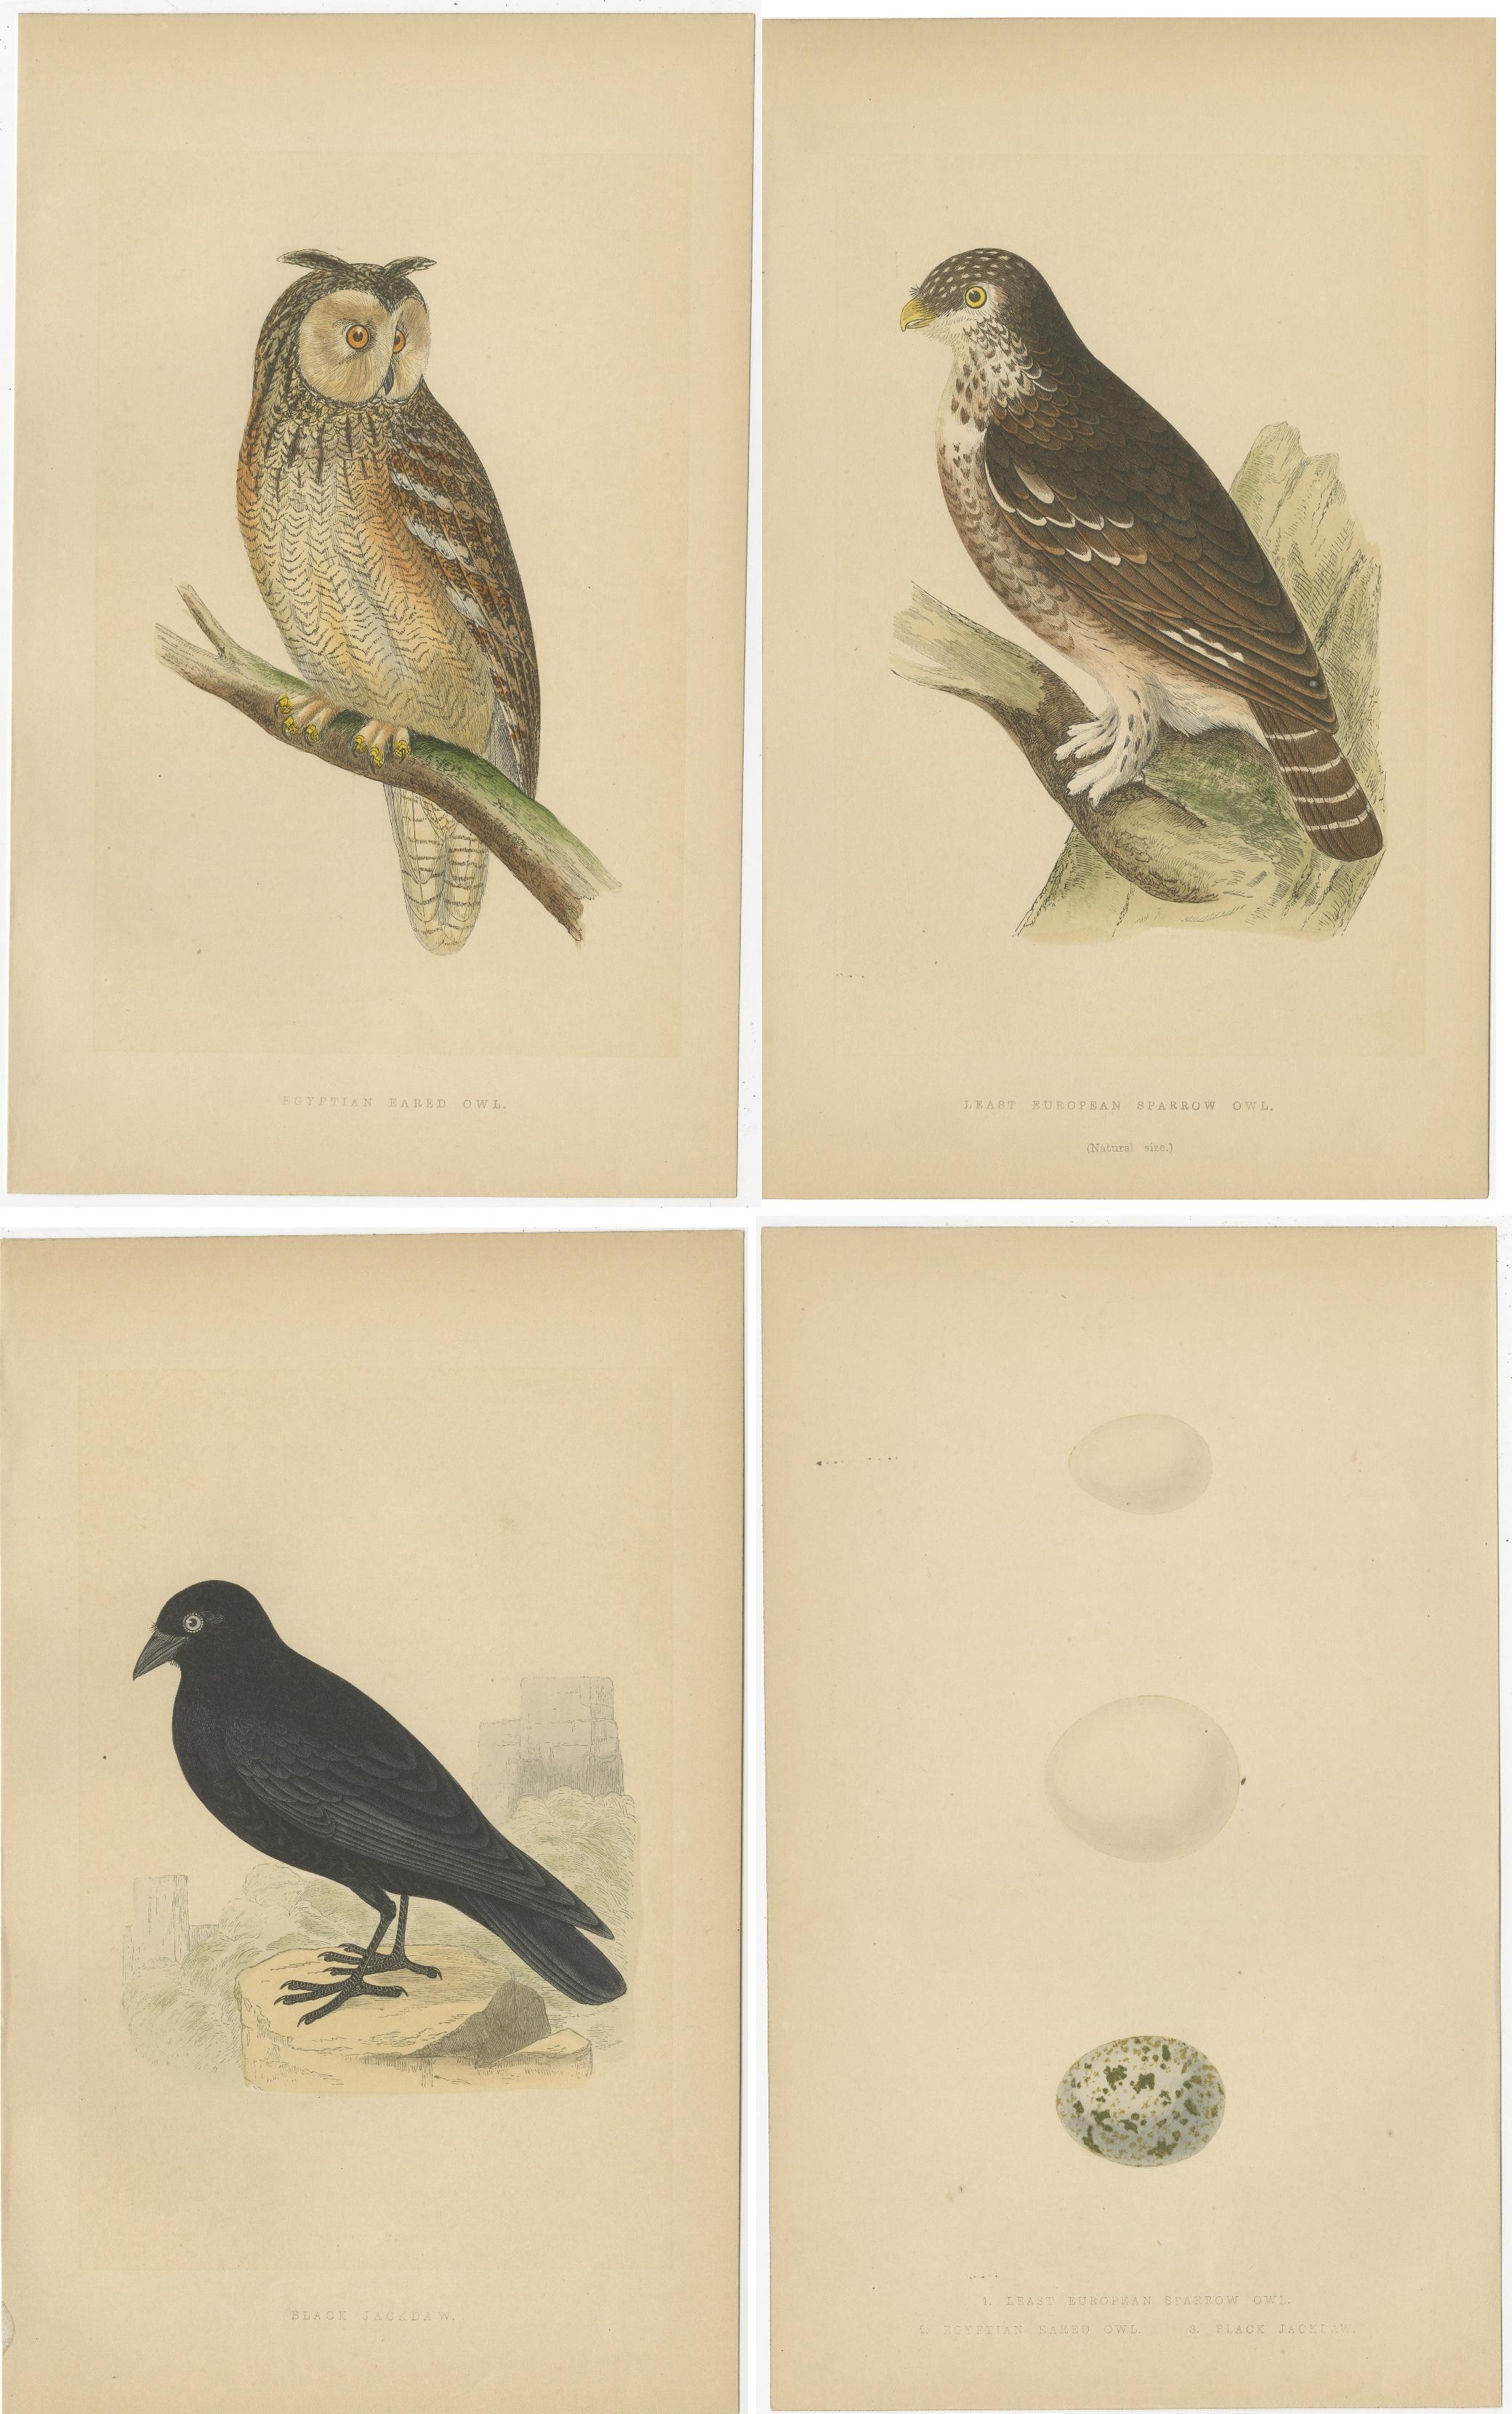 Set of four antique birds prints of an Egyptian eared owl, least European sparrow owl, black jackdaw and their eggs. These prints originate from 'A history of the birds of Europe, not observed in the British Isles' by Charles Robert Bree and